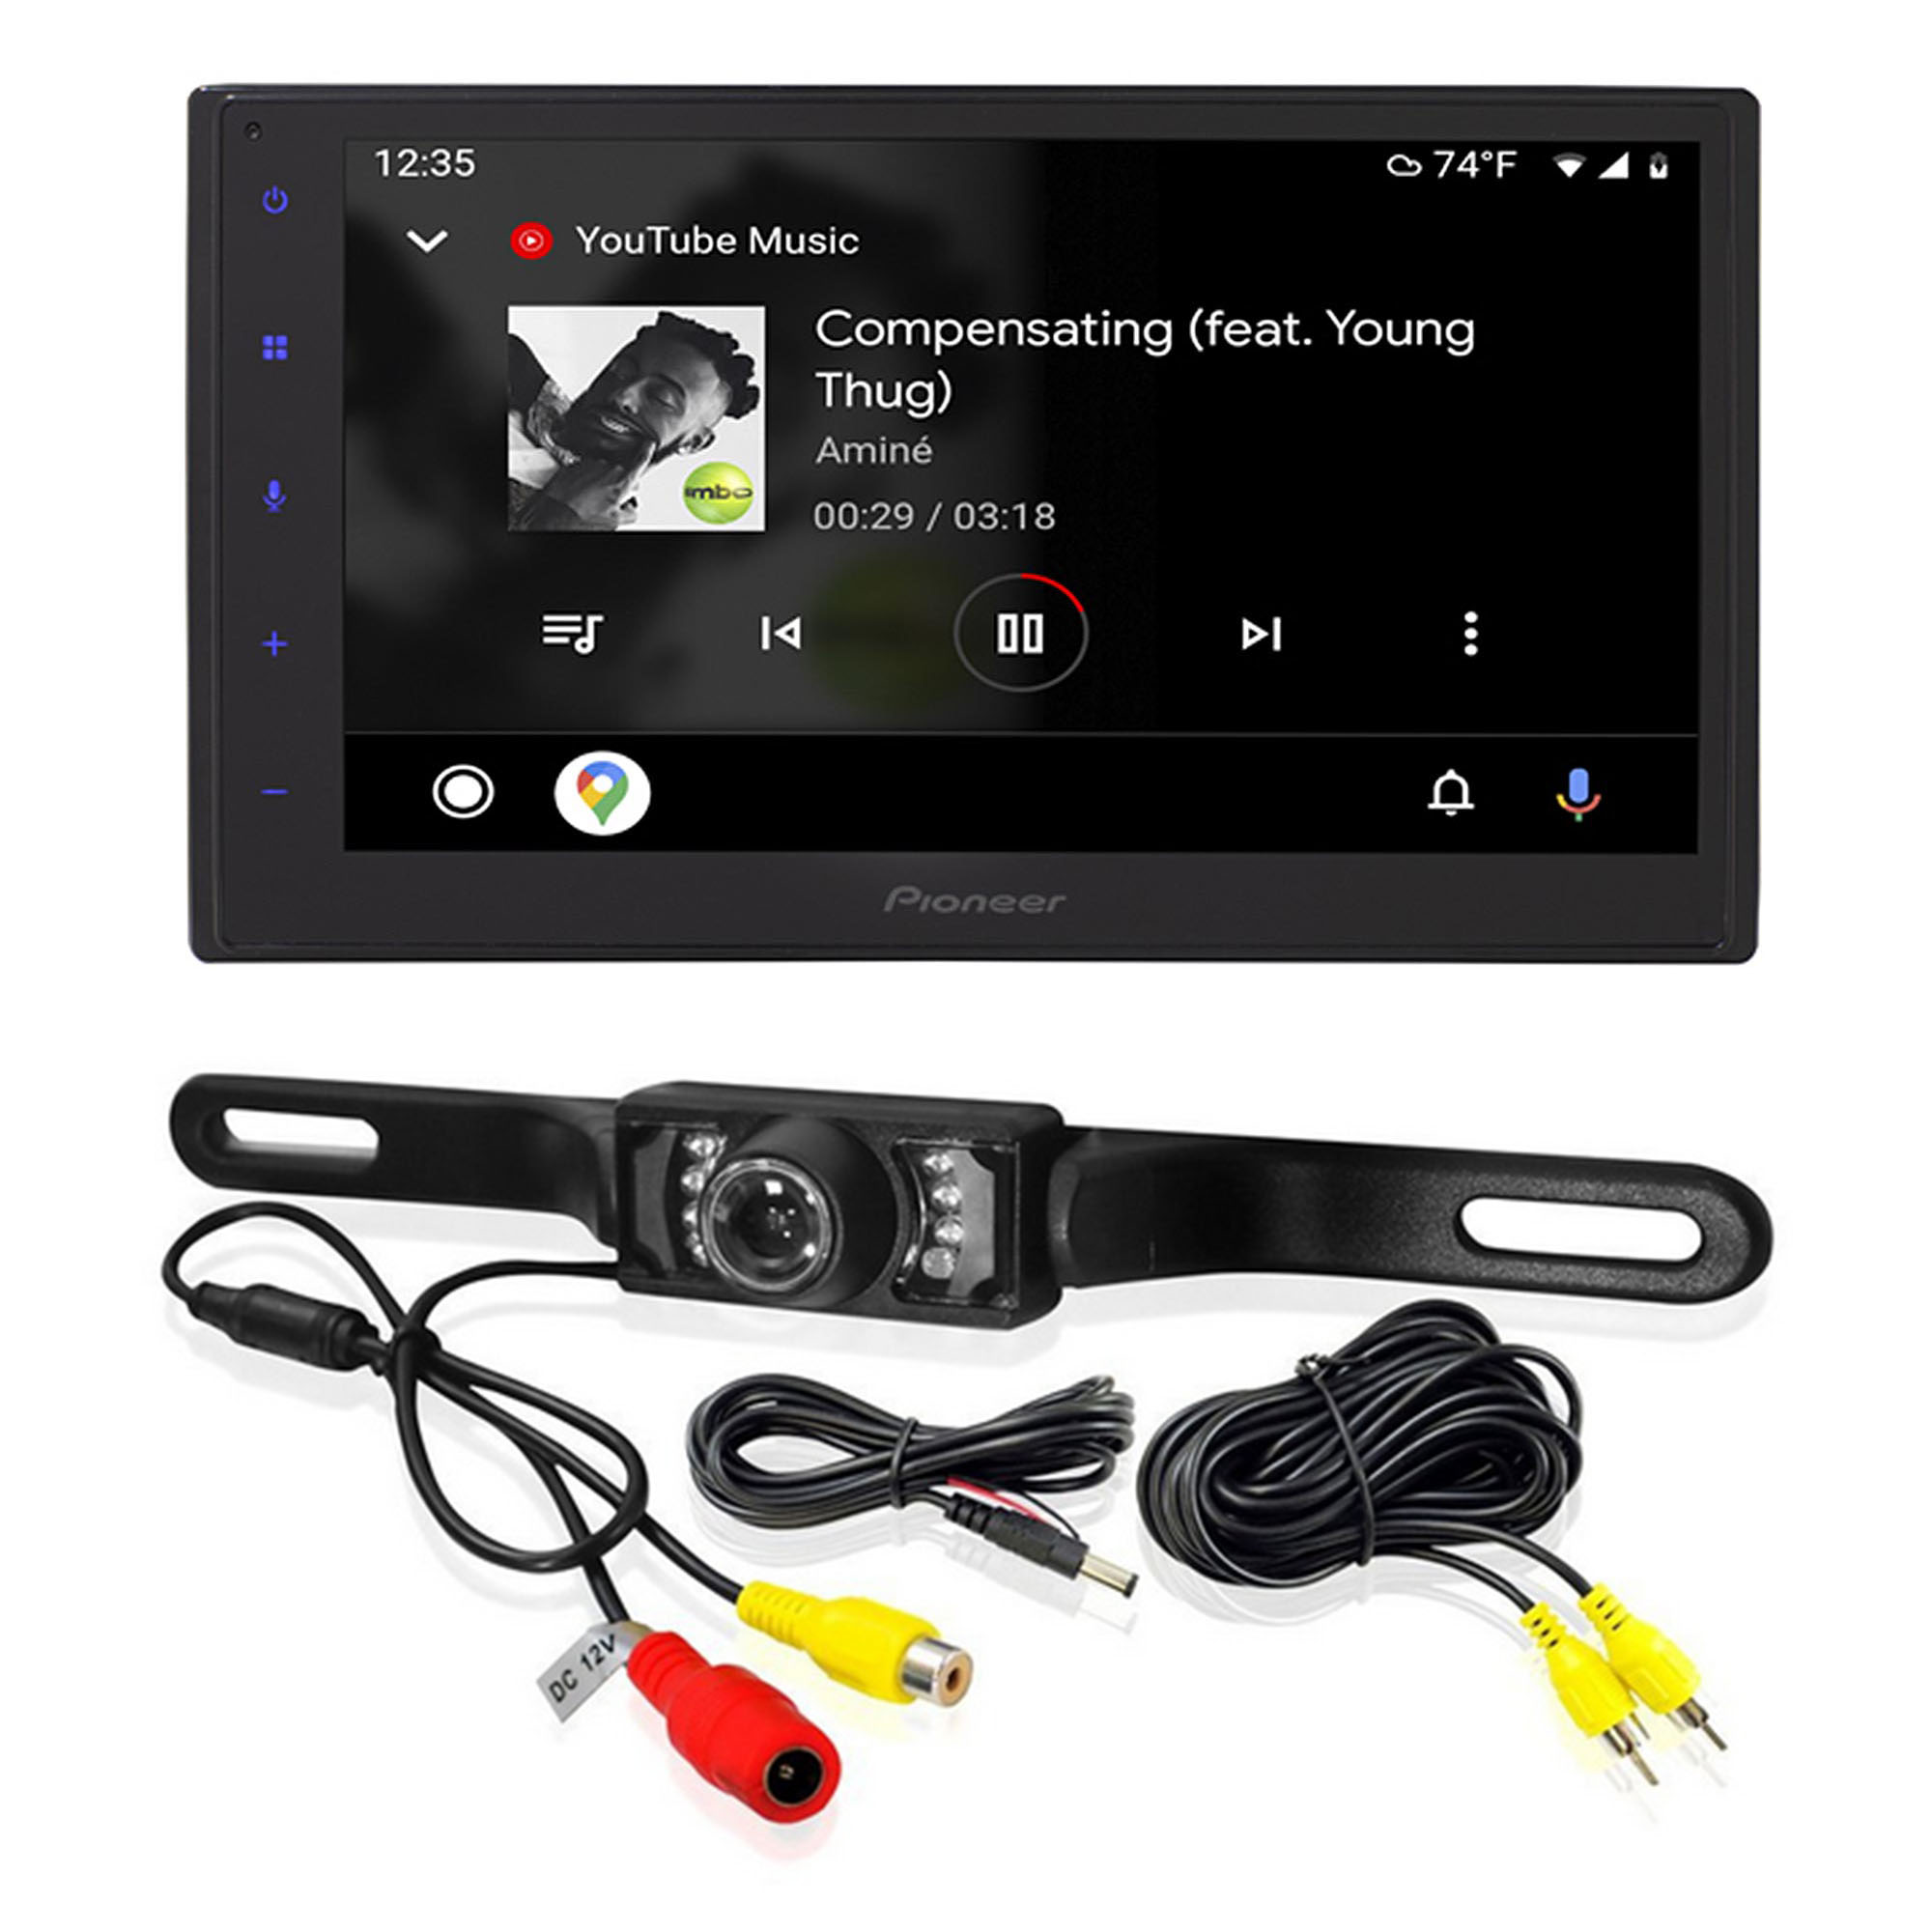 Pioneer DMH-1770NEX Multimedia Receiver Compatible with Apple CarPlay & Android Auto with License Plate Mounted Backup Camera - image 1 of 7